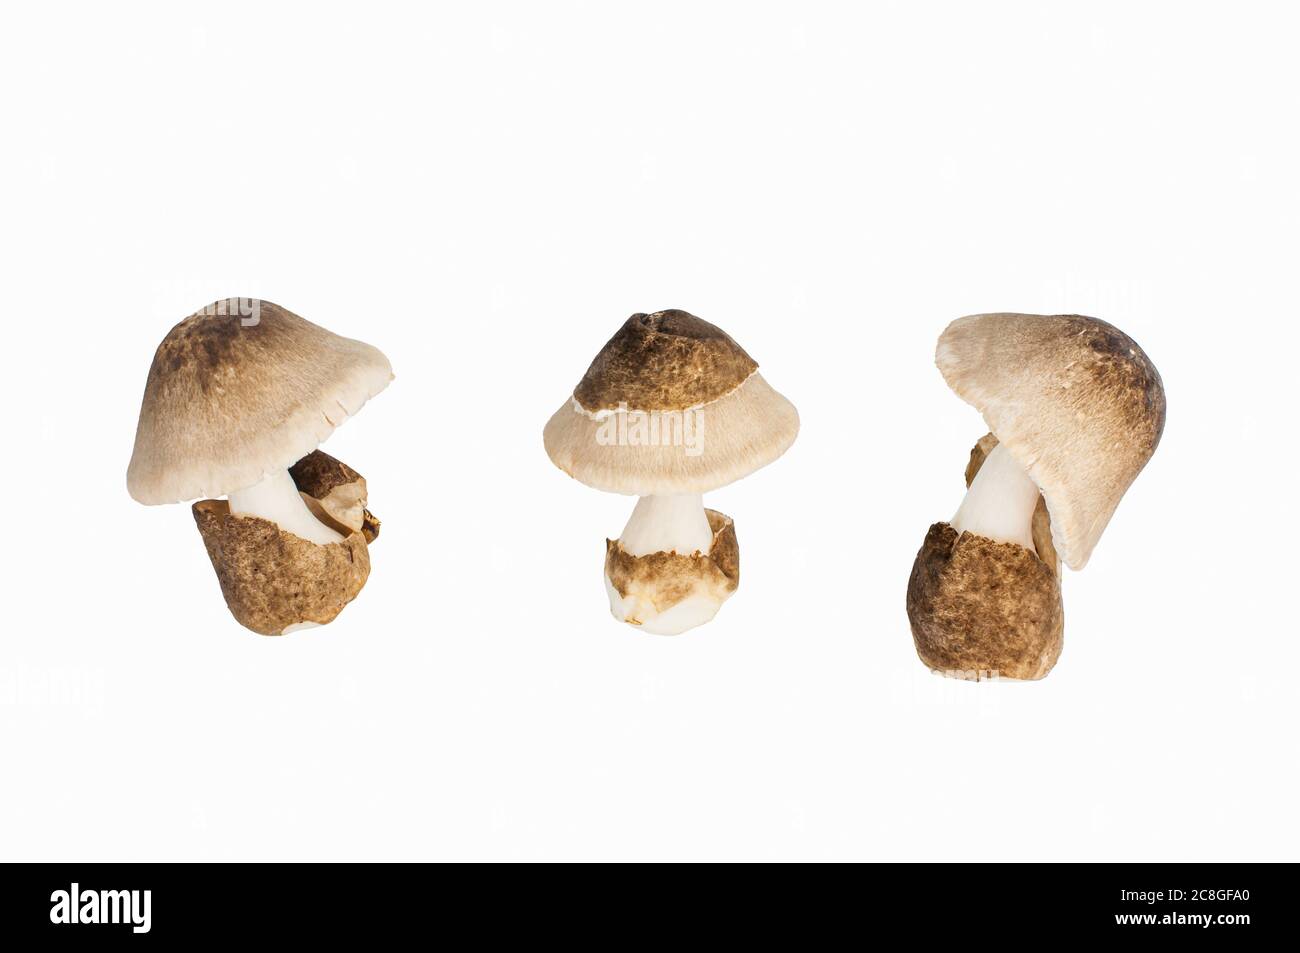 Volvariella volvacea, Straw Mushroom on white background, clipping path included. Stock Photo